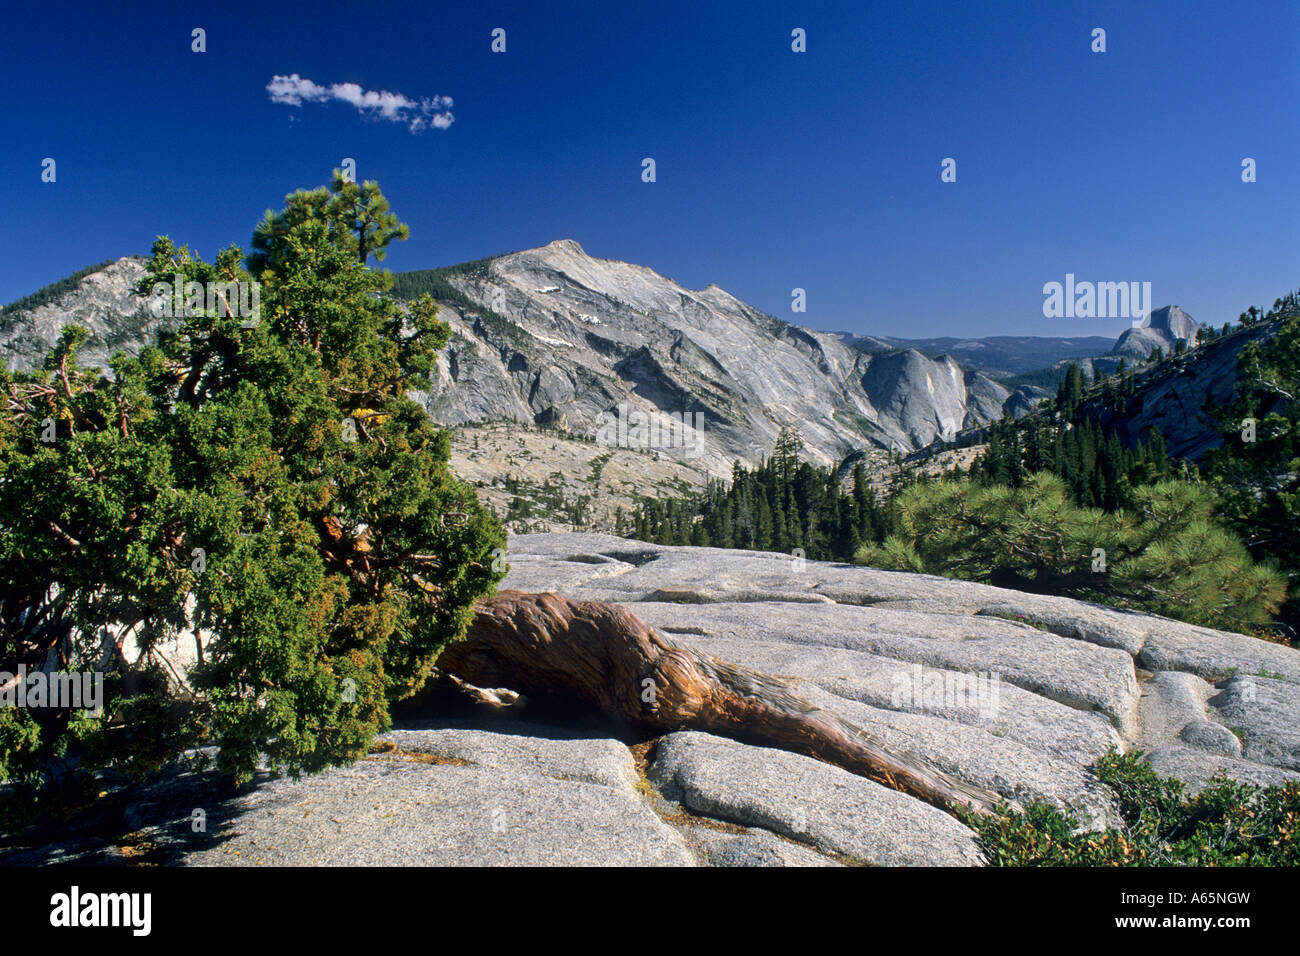 Huge granite escarpment of Clouds Rest from Olmsted Point Tioga Pass Road Yosemite National Park CALIFORNIA Stock Photo